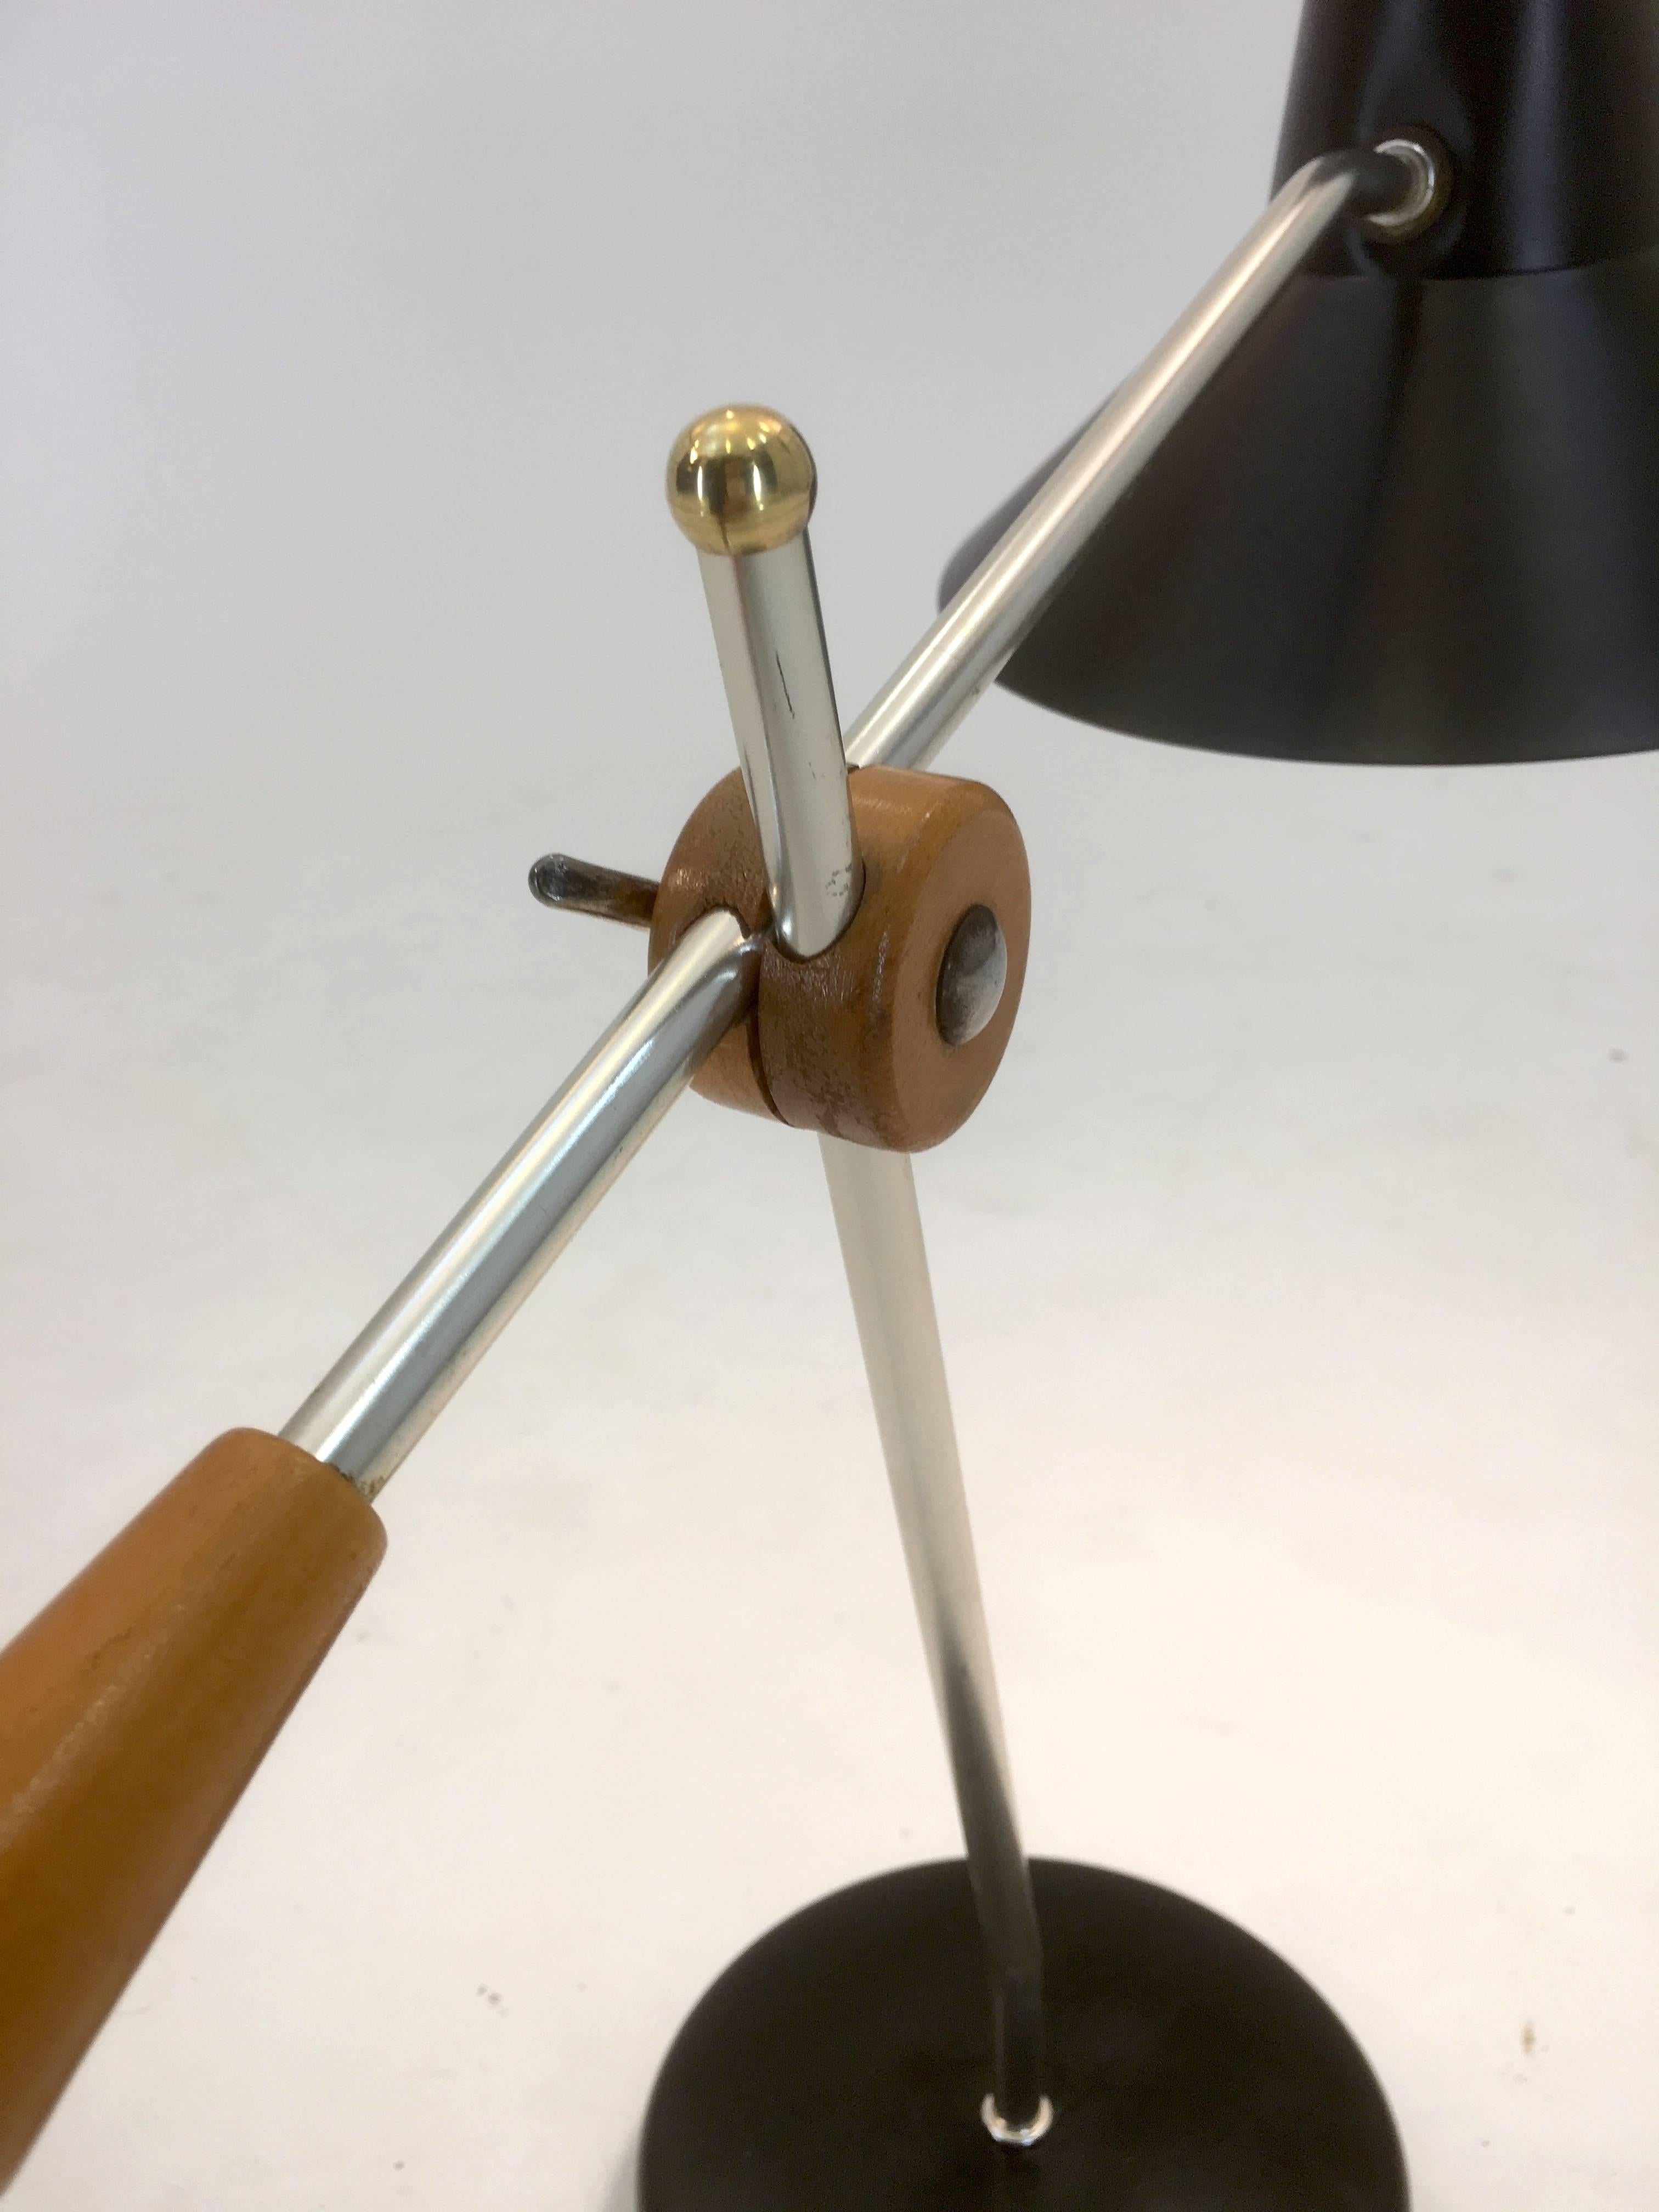 Unknown Exceptional Articulating Desk Lamp with Wood and Steel Features